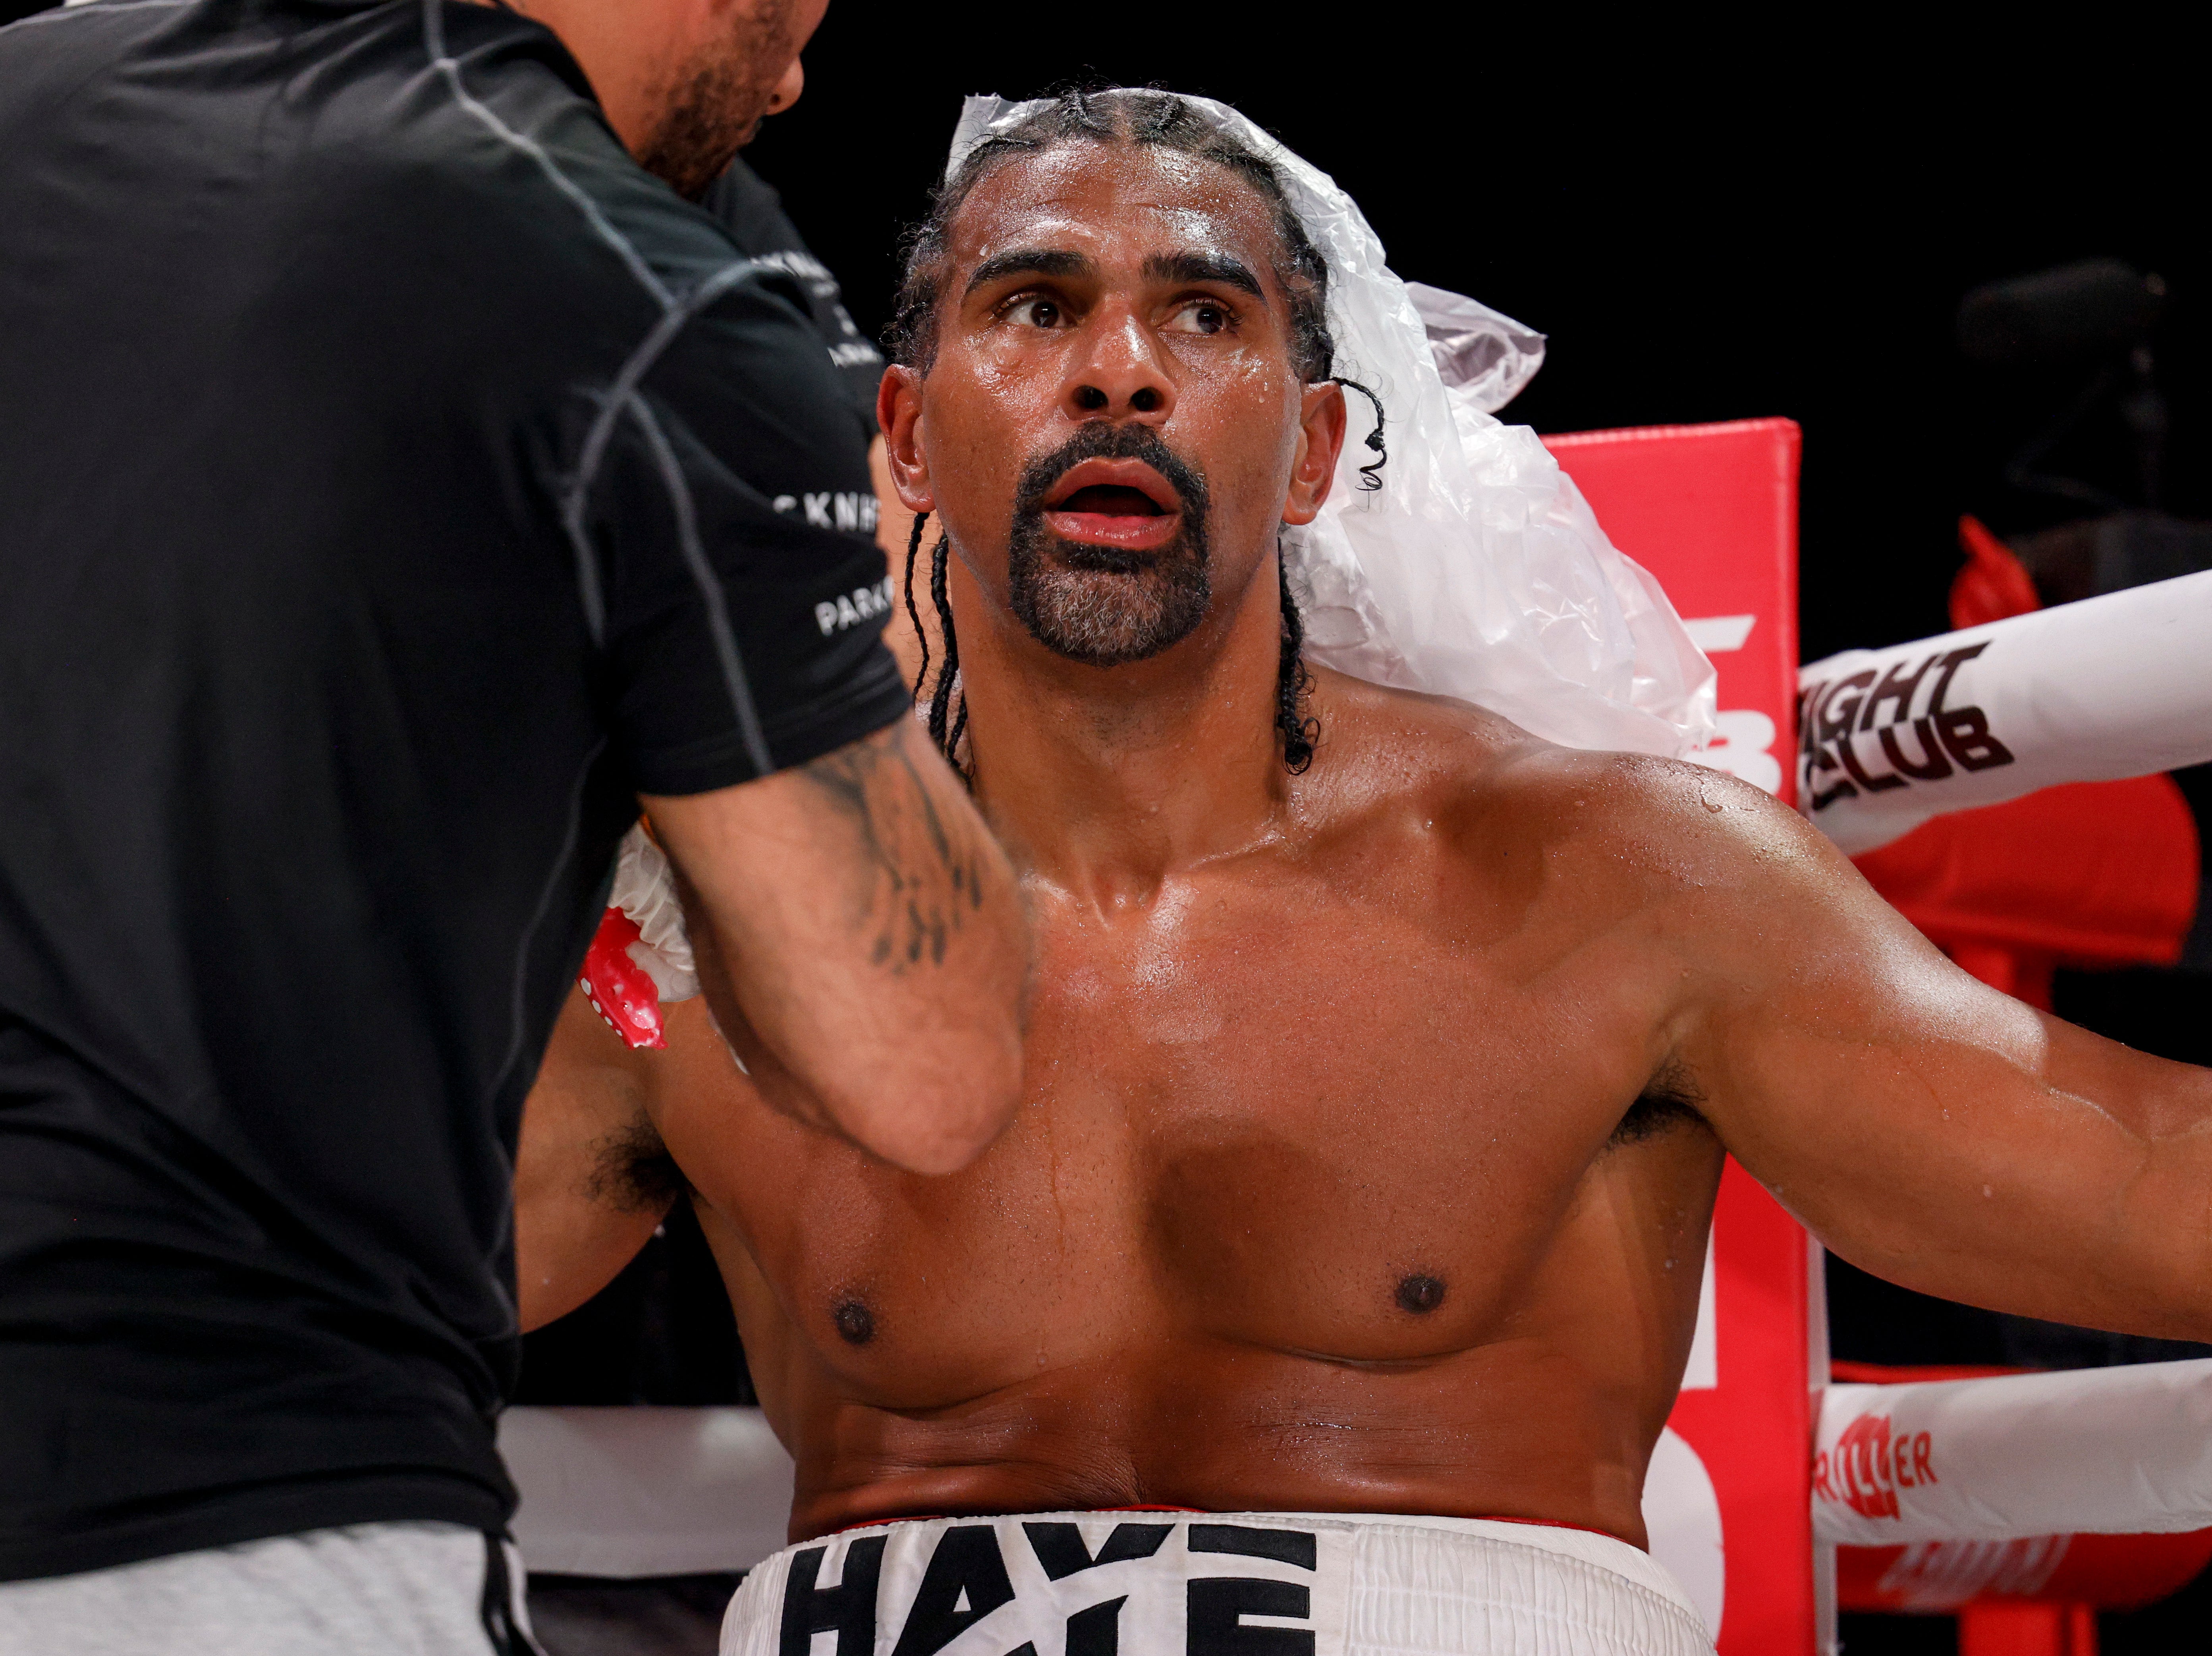 David Haye between rounds of his fight against Joe Fournier this month